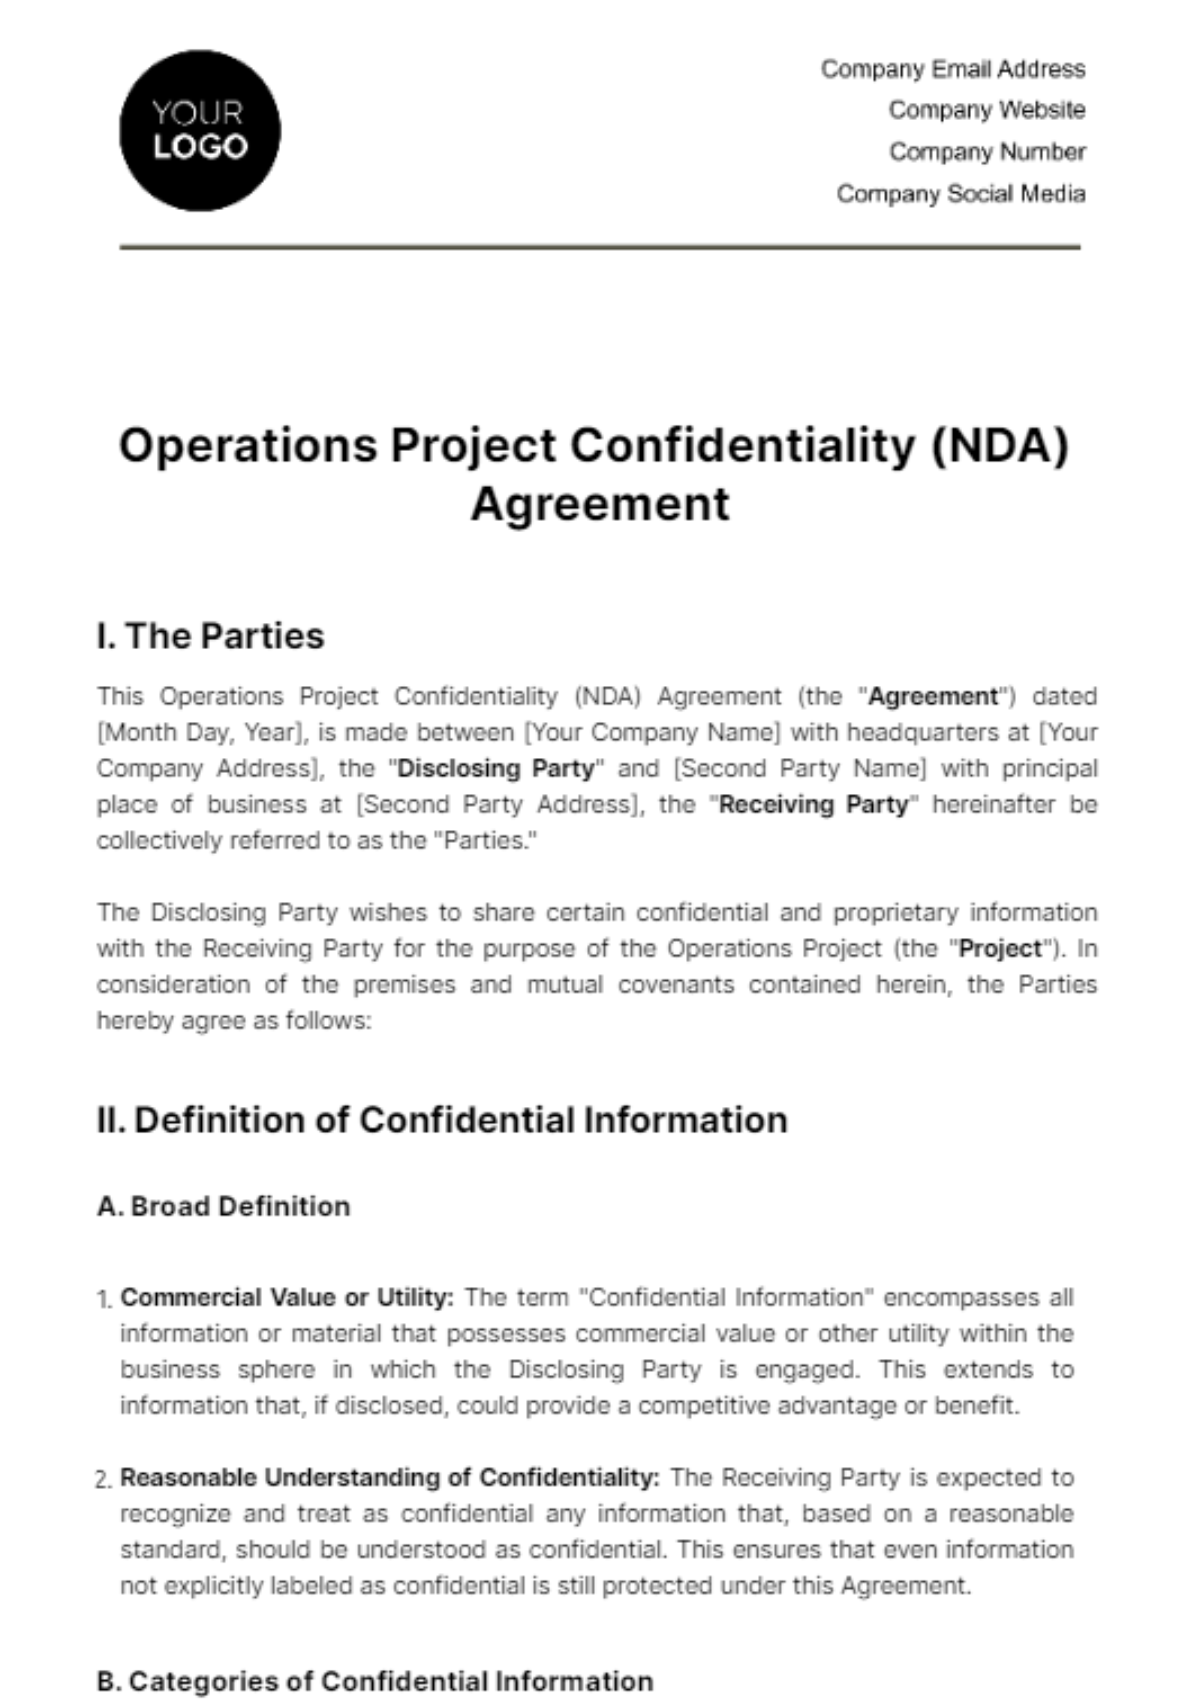 Operations Project Confidentiality (NDA) Agreement Template